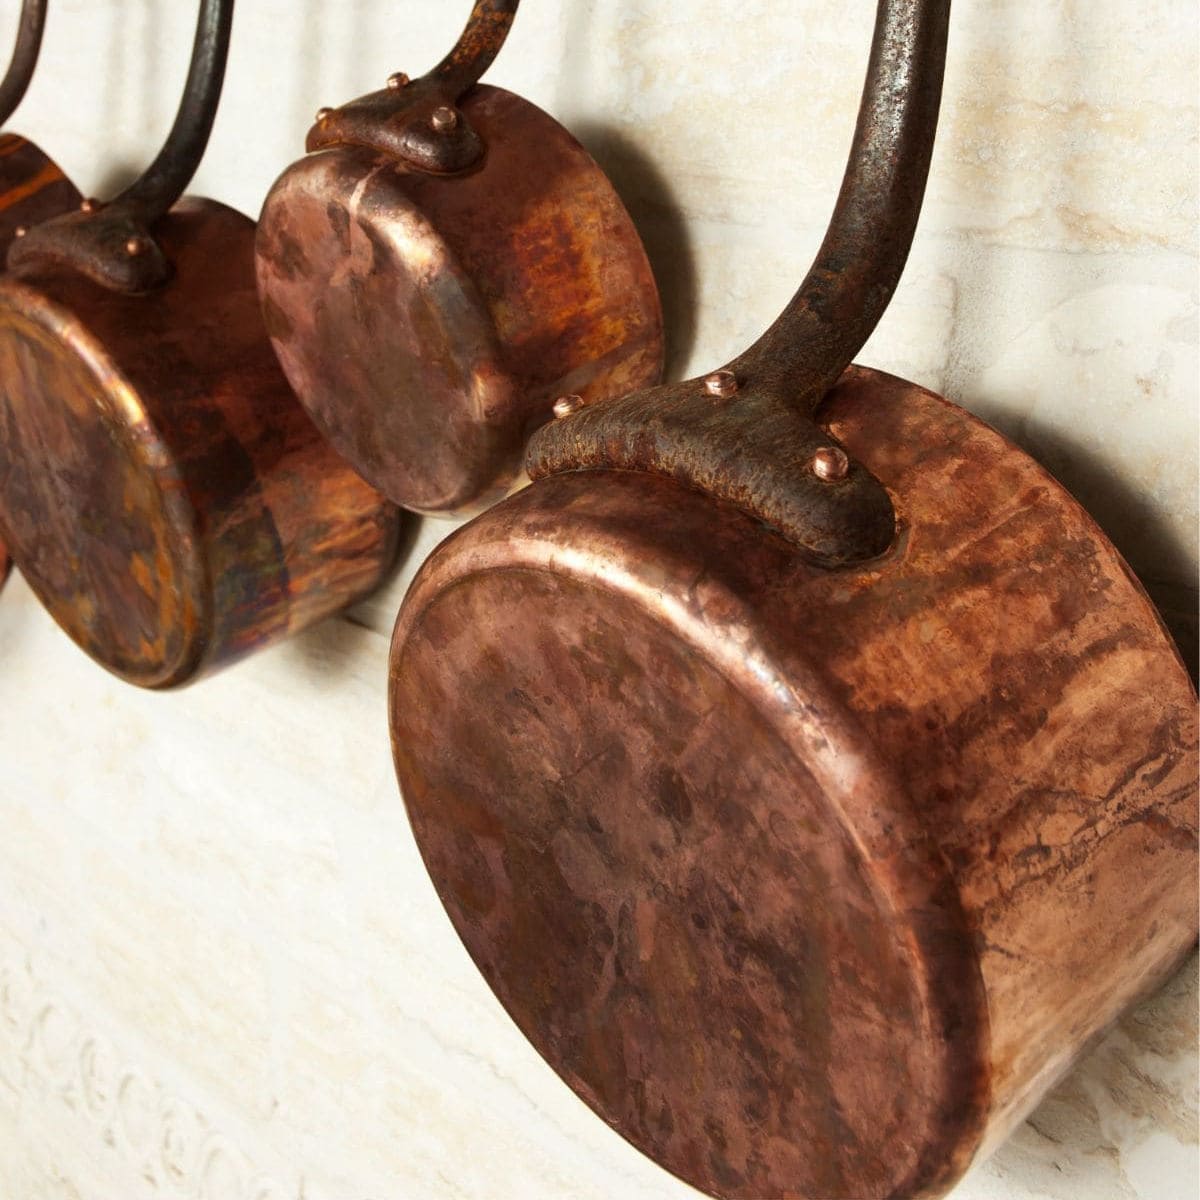 Copper saucepans hanging on the wall.